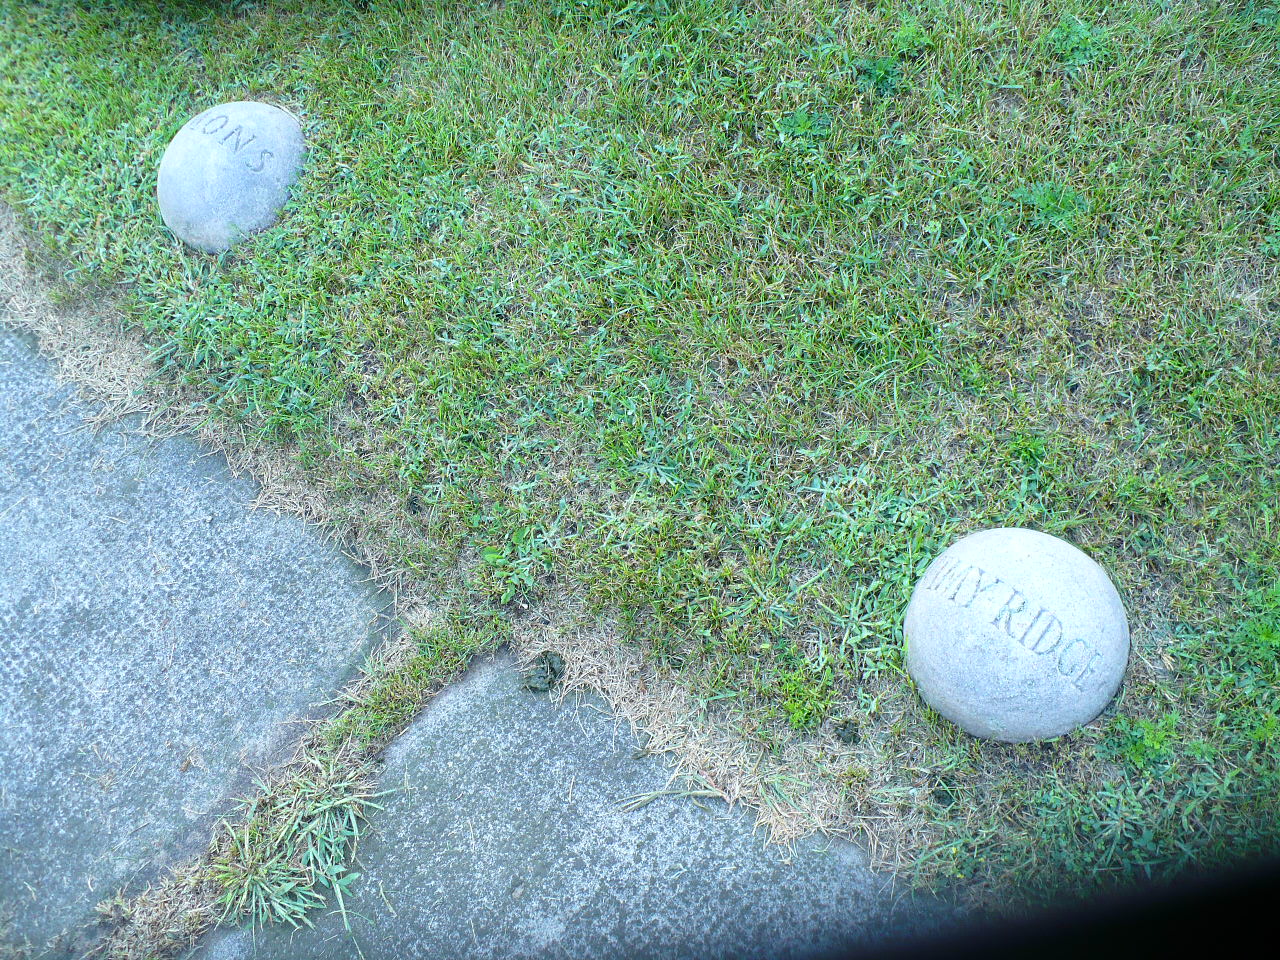 Concrete stones engraved with Mons and Vimy Ridge.